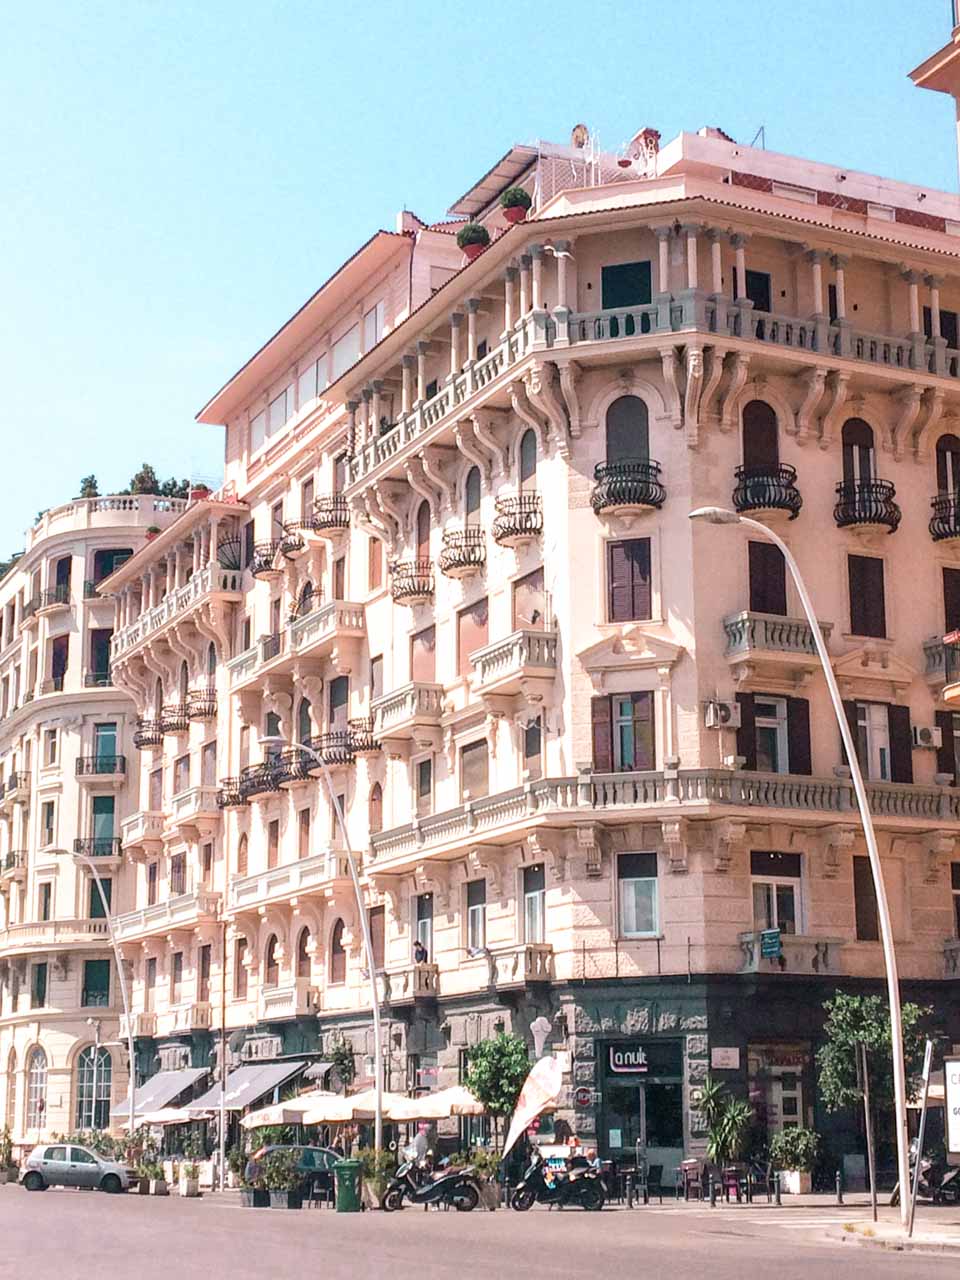 A pastel pink building in Naples, Italy